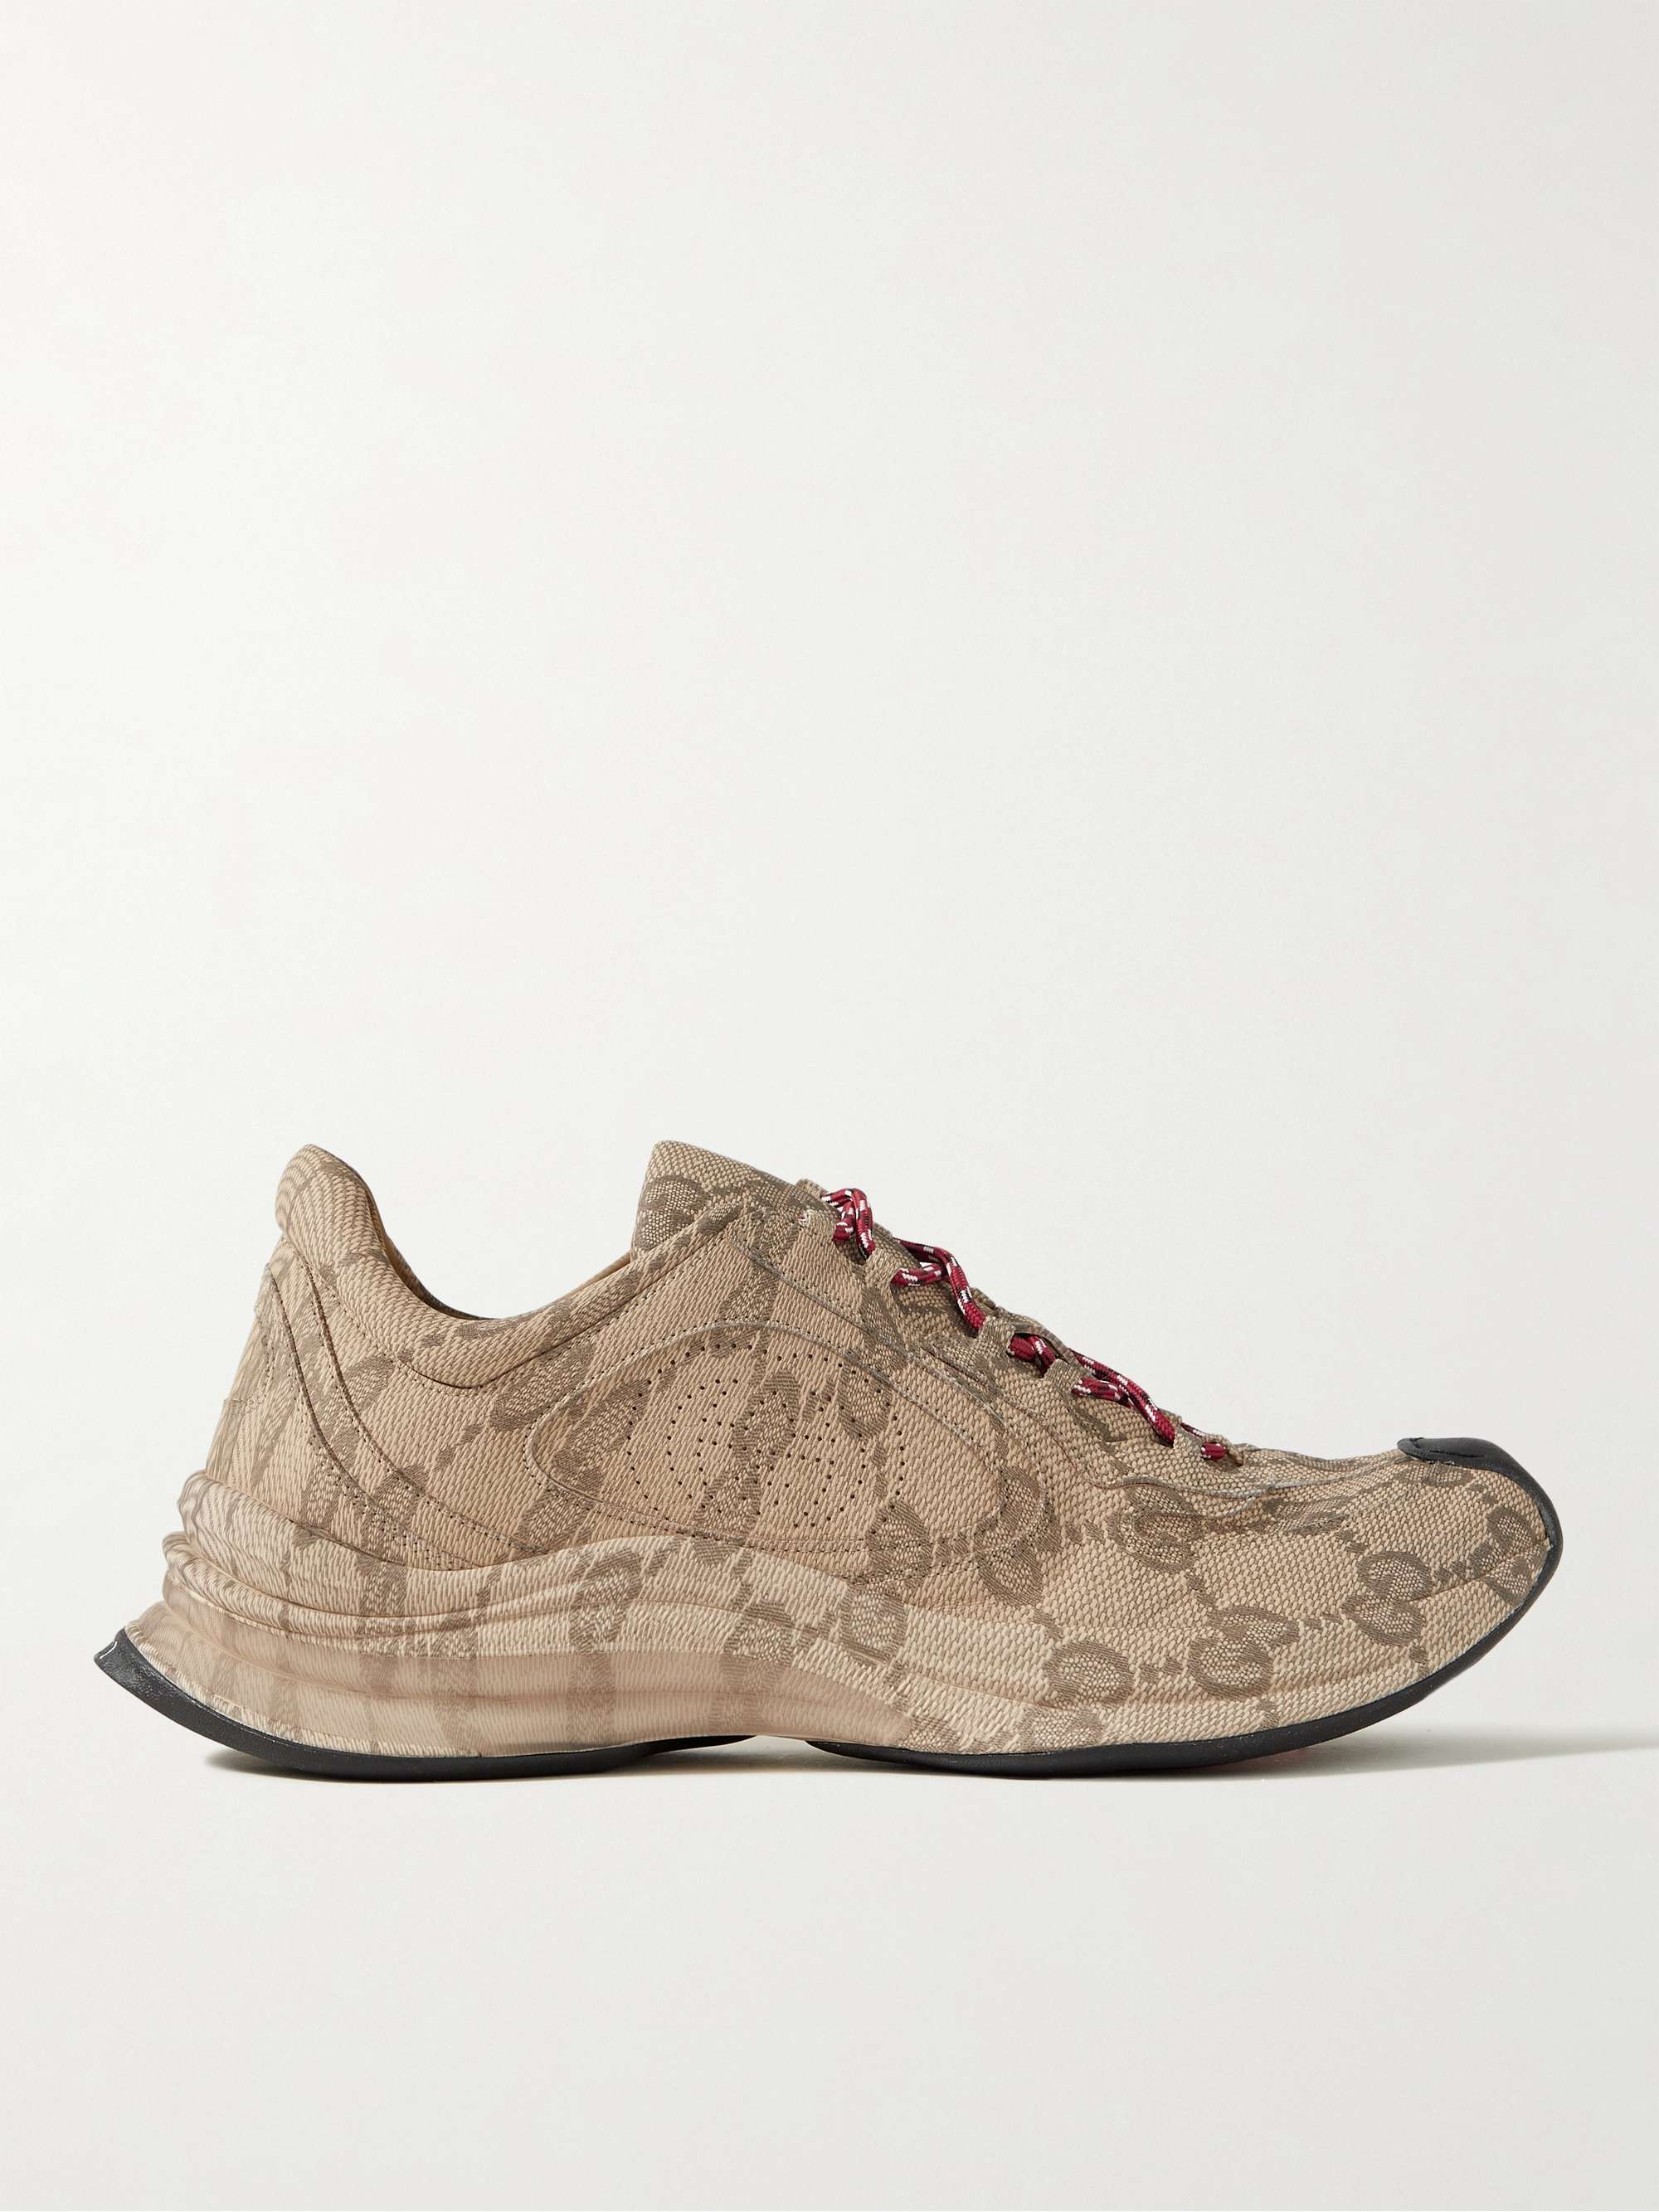 GUCCI Logo-Print Leather Sneakers for Men | MR PORTER